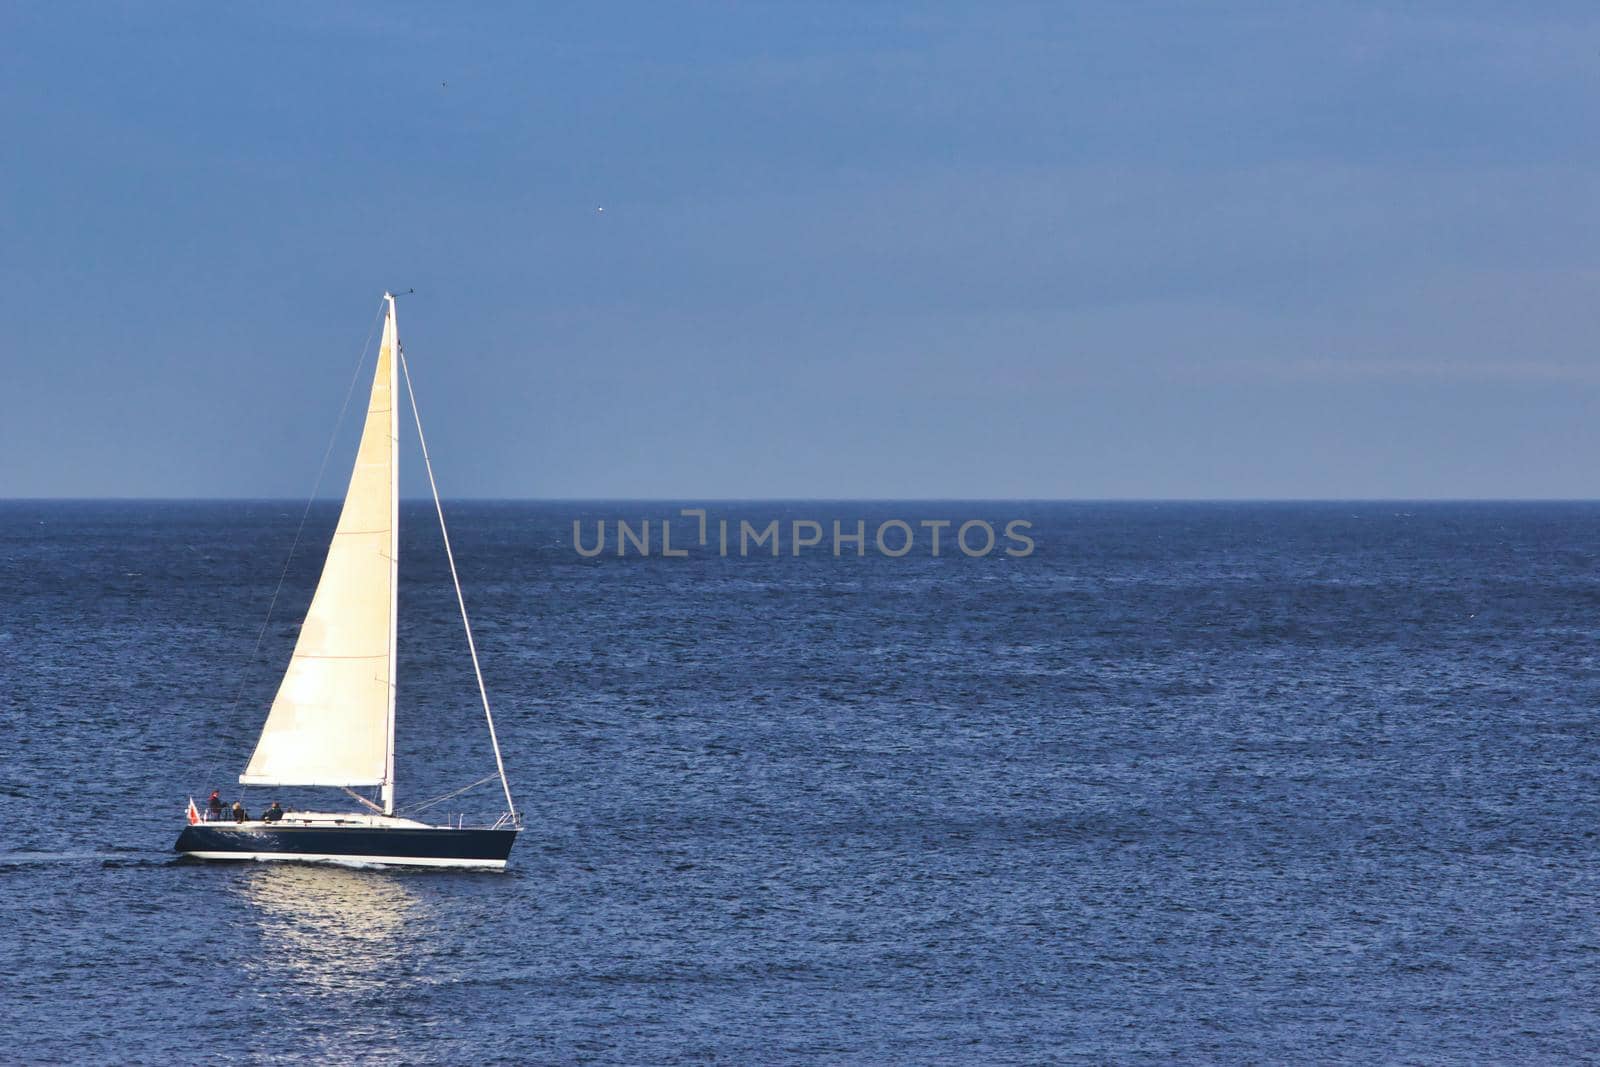 Sailboat sailing on the sea with a clear blue sky and the horizon in the background